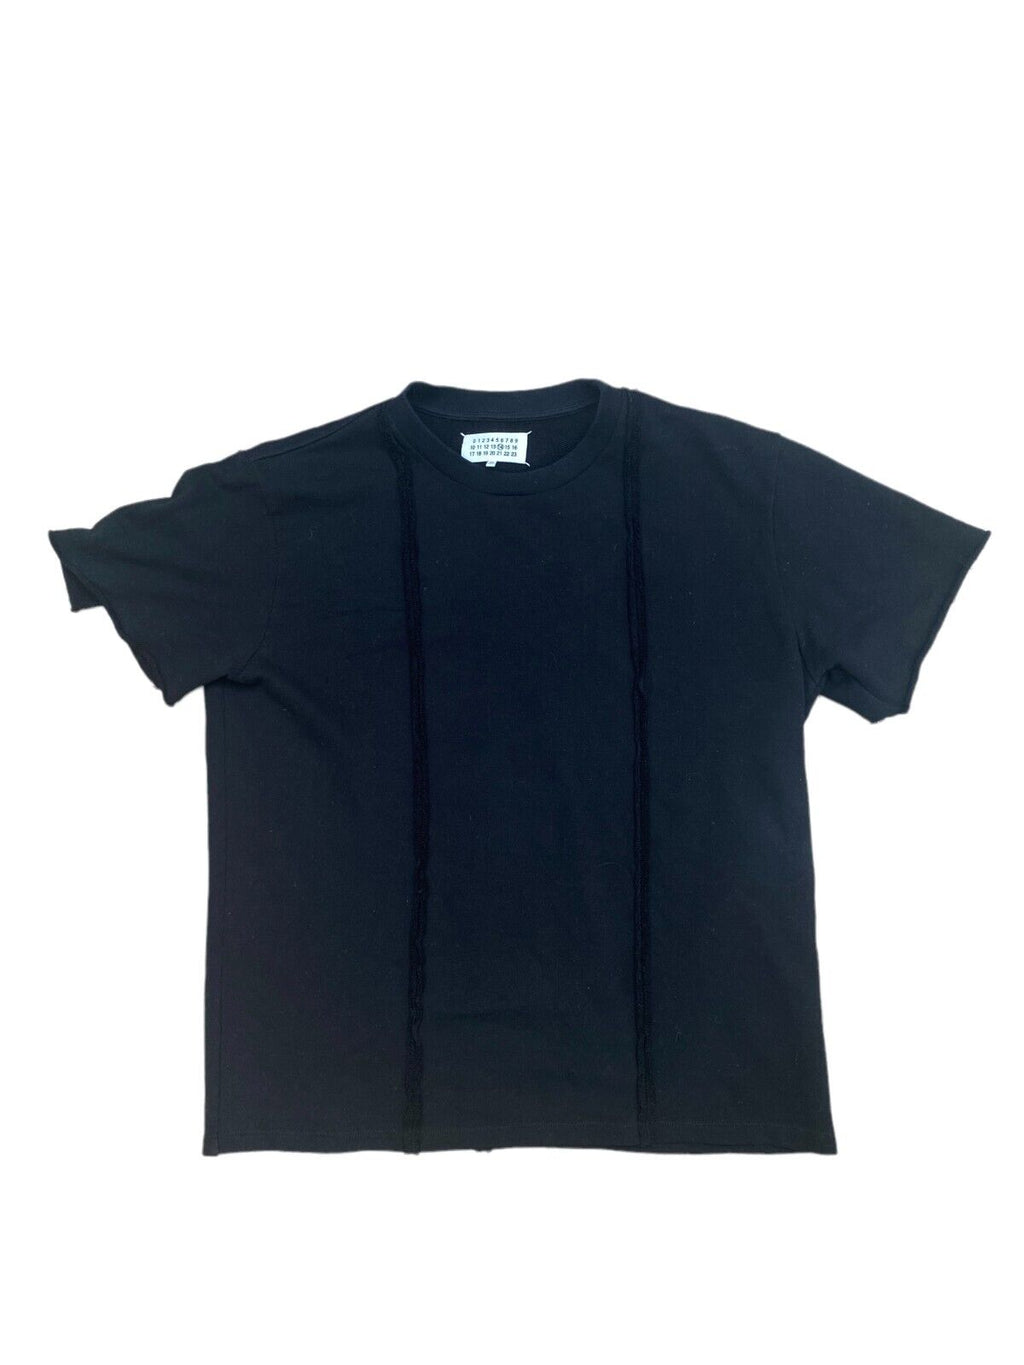 FW 2014 Black Short Sleeves Sweater  Inside out concept